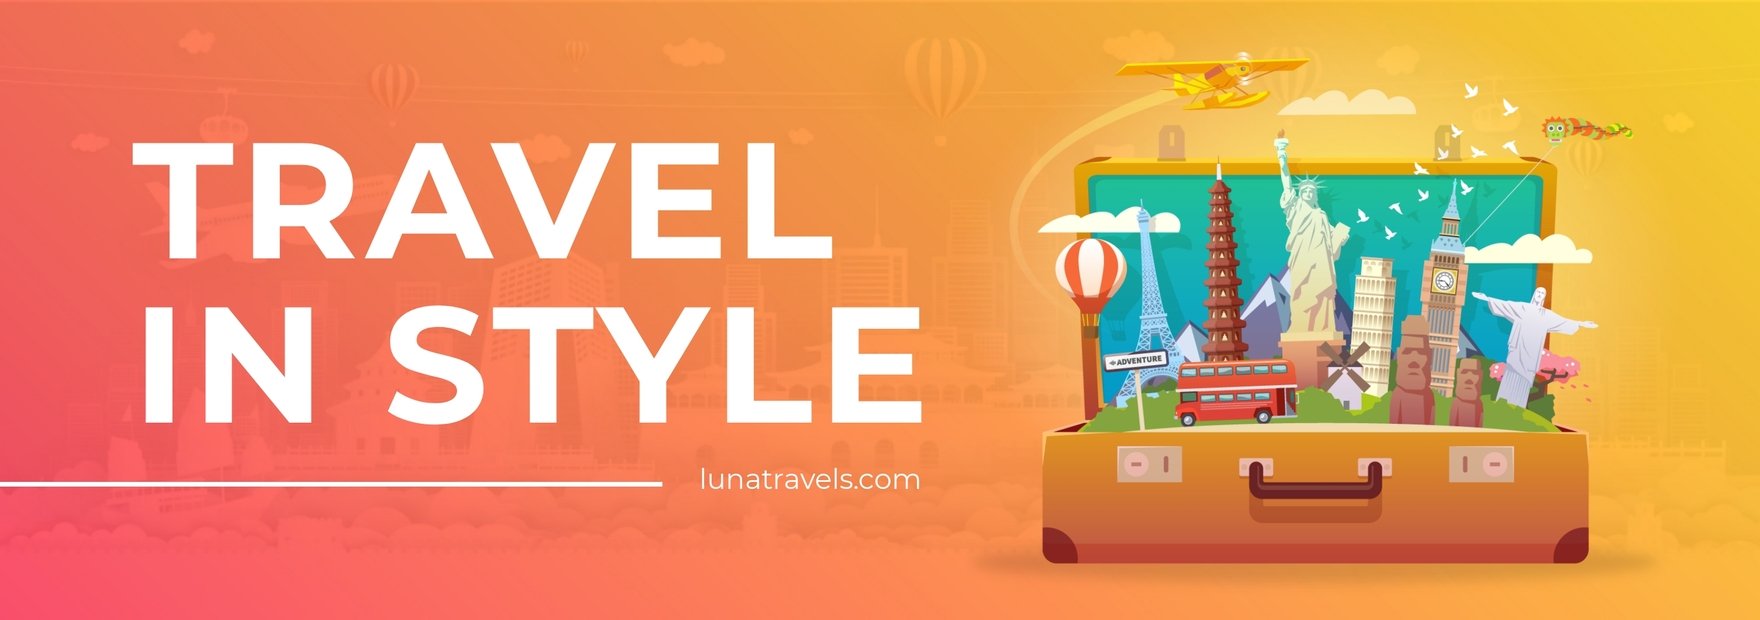 Free Travel Tumblr Banner Template